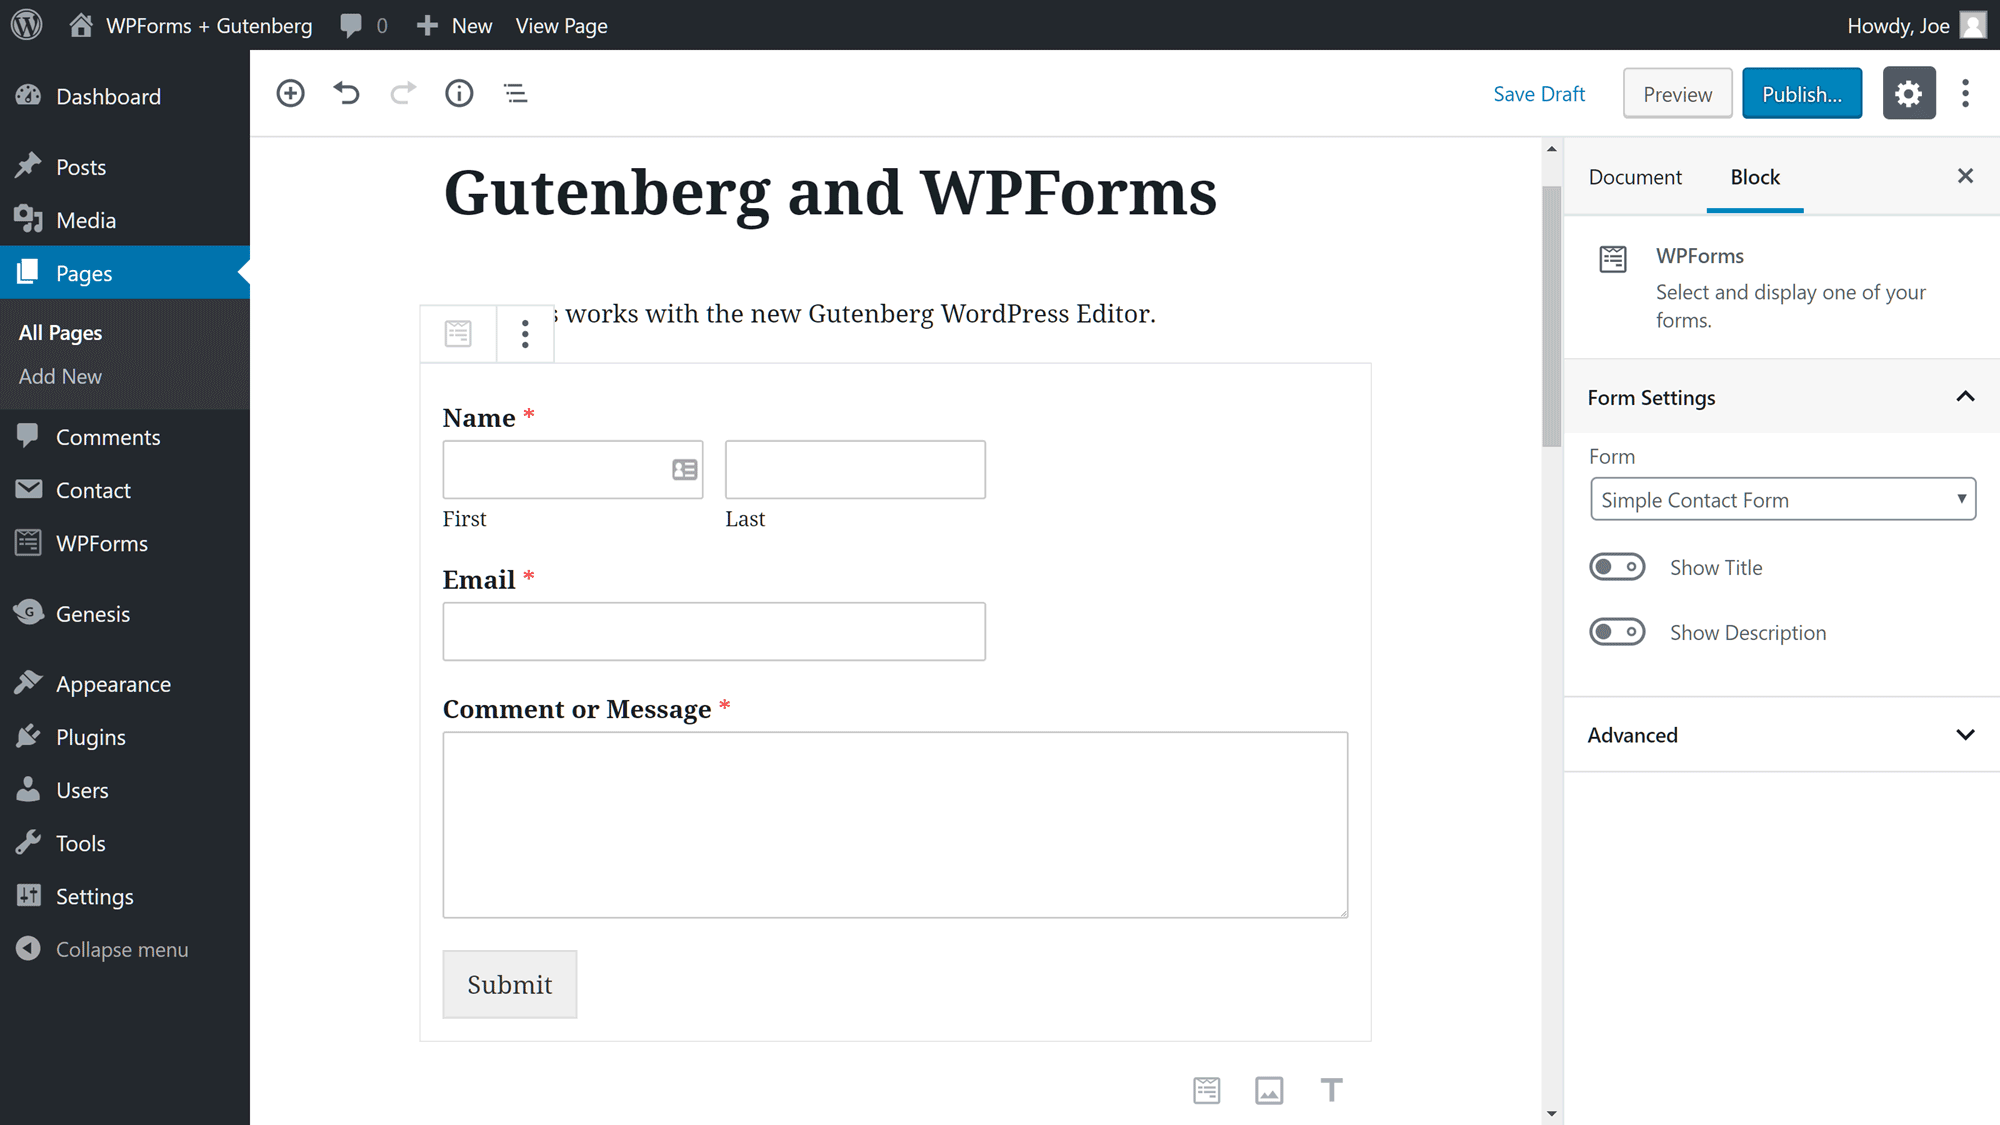 Displaying a form in the Gutenberg editor 